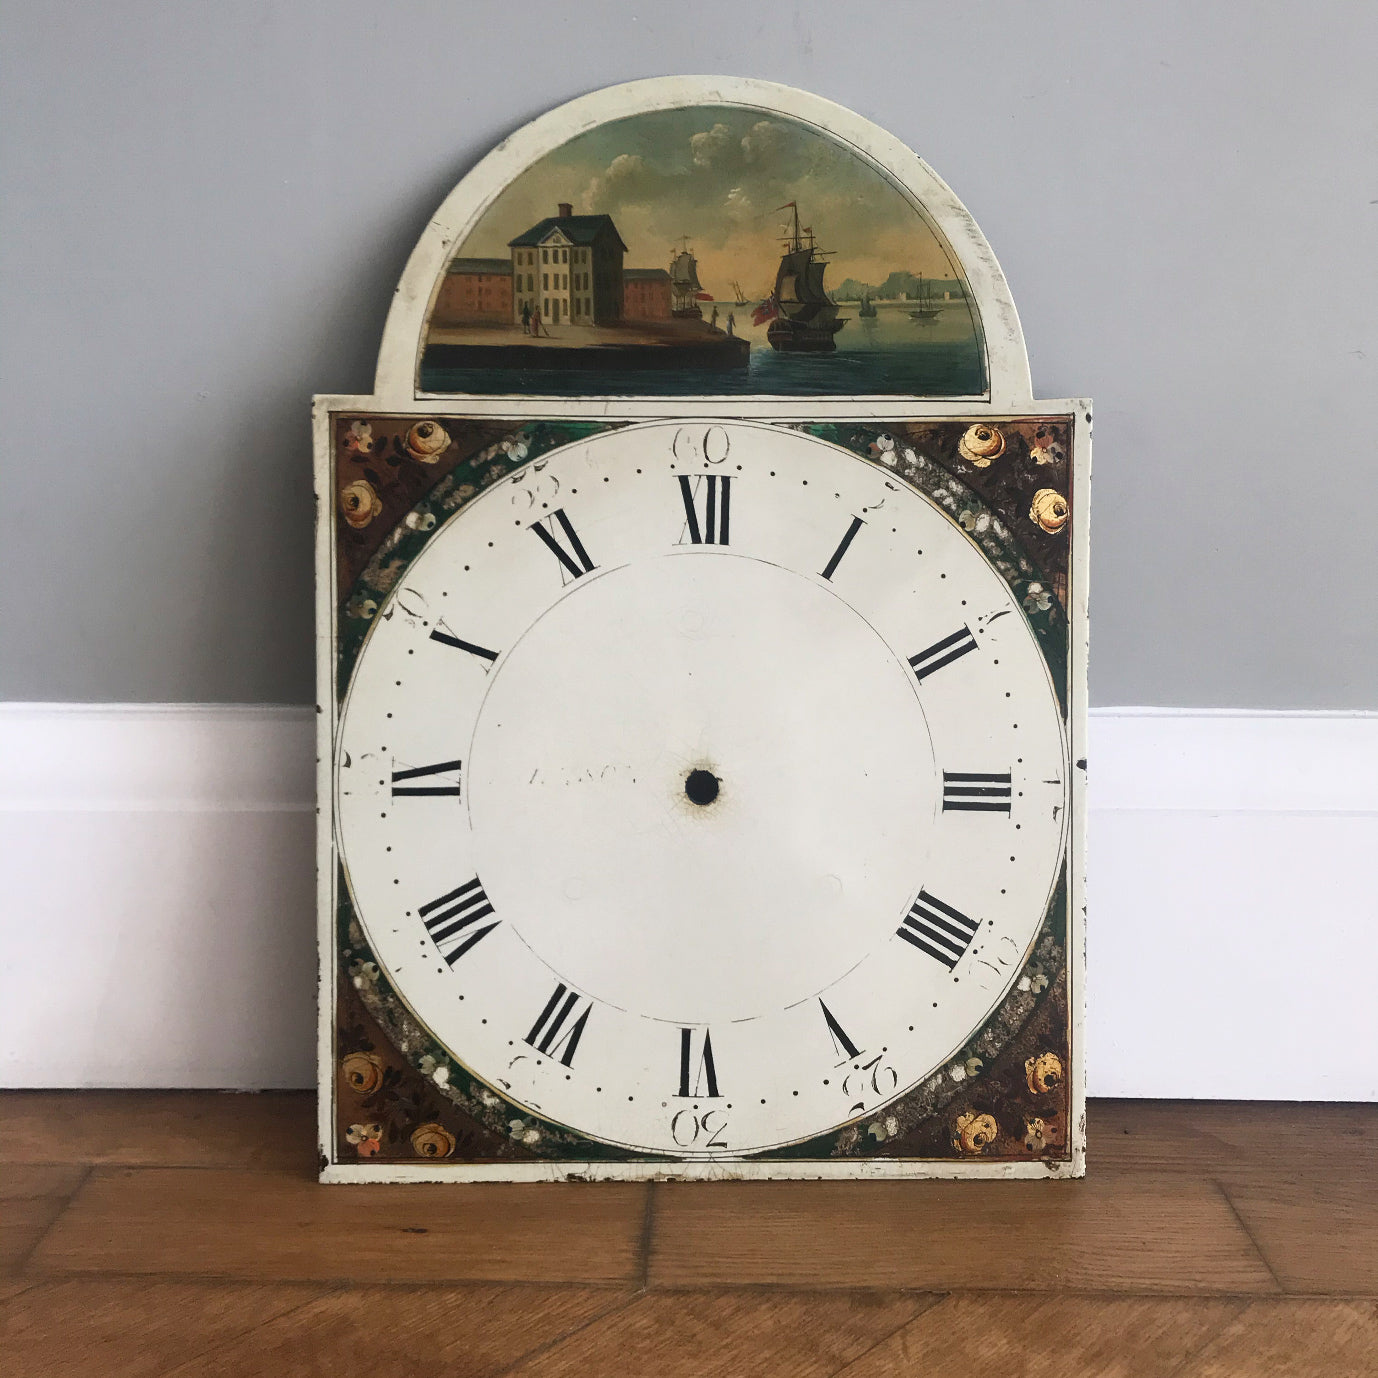 Beautiful Antique Clock Face by Johnson of Knaresboro. It has a charming harbour scene with a couple strolling along a period waterside quay and two naval frigates in full sail showing the Royal Navy flag - SHOP NOW - www.intovintage.co.uk